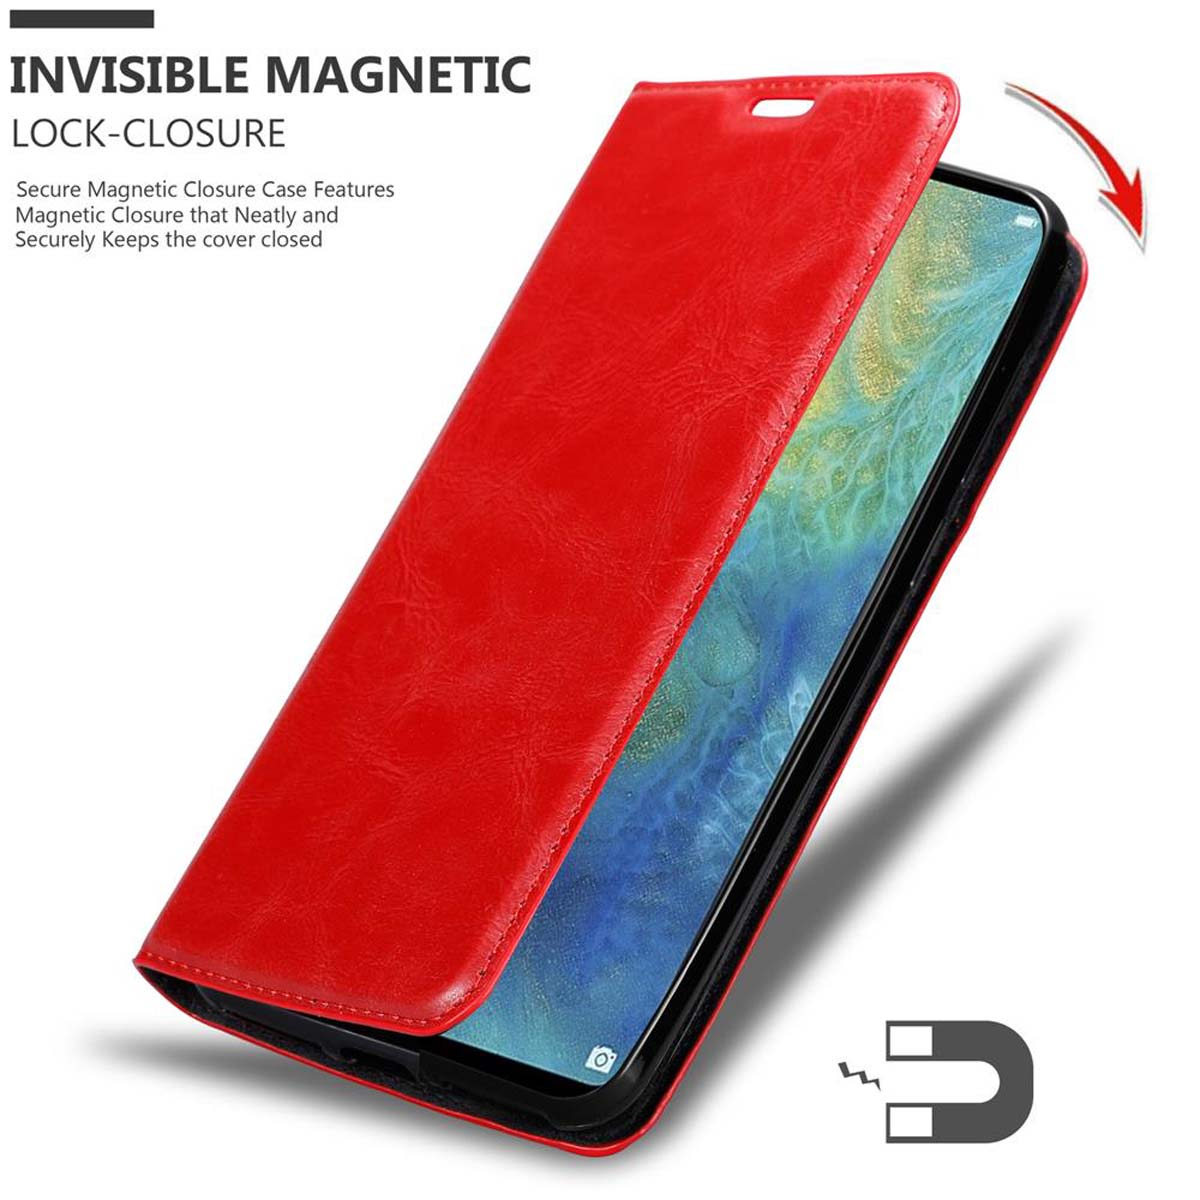 Book MATE 20 Huawei, ROT X, Bookcover, Magnet, APFEL CADORABO Hülle Invisible